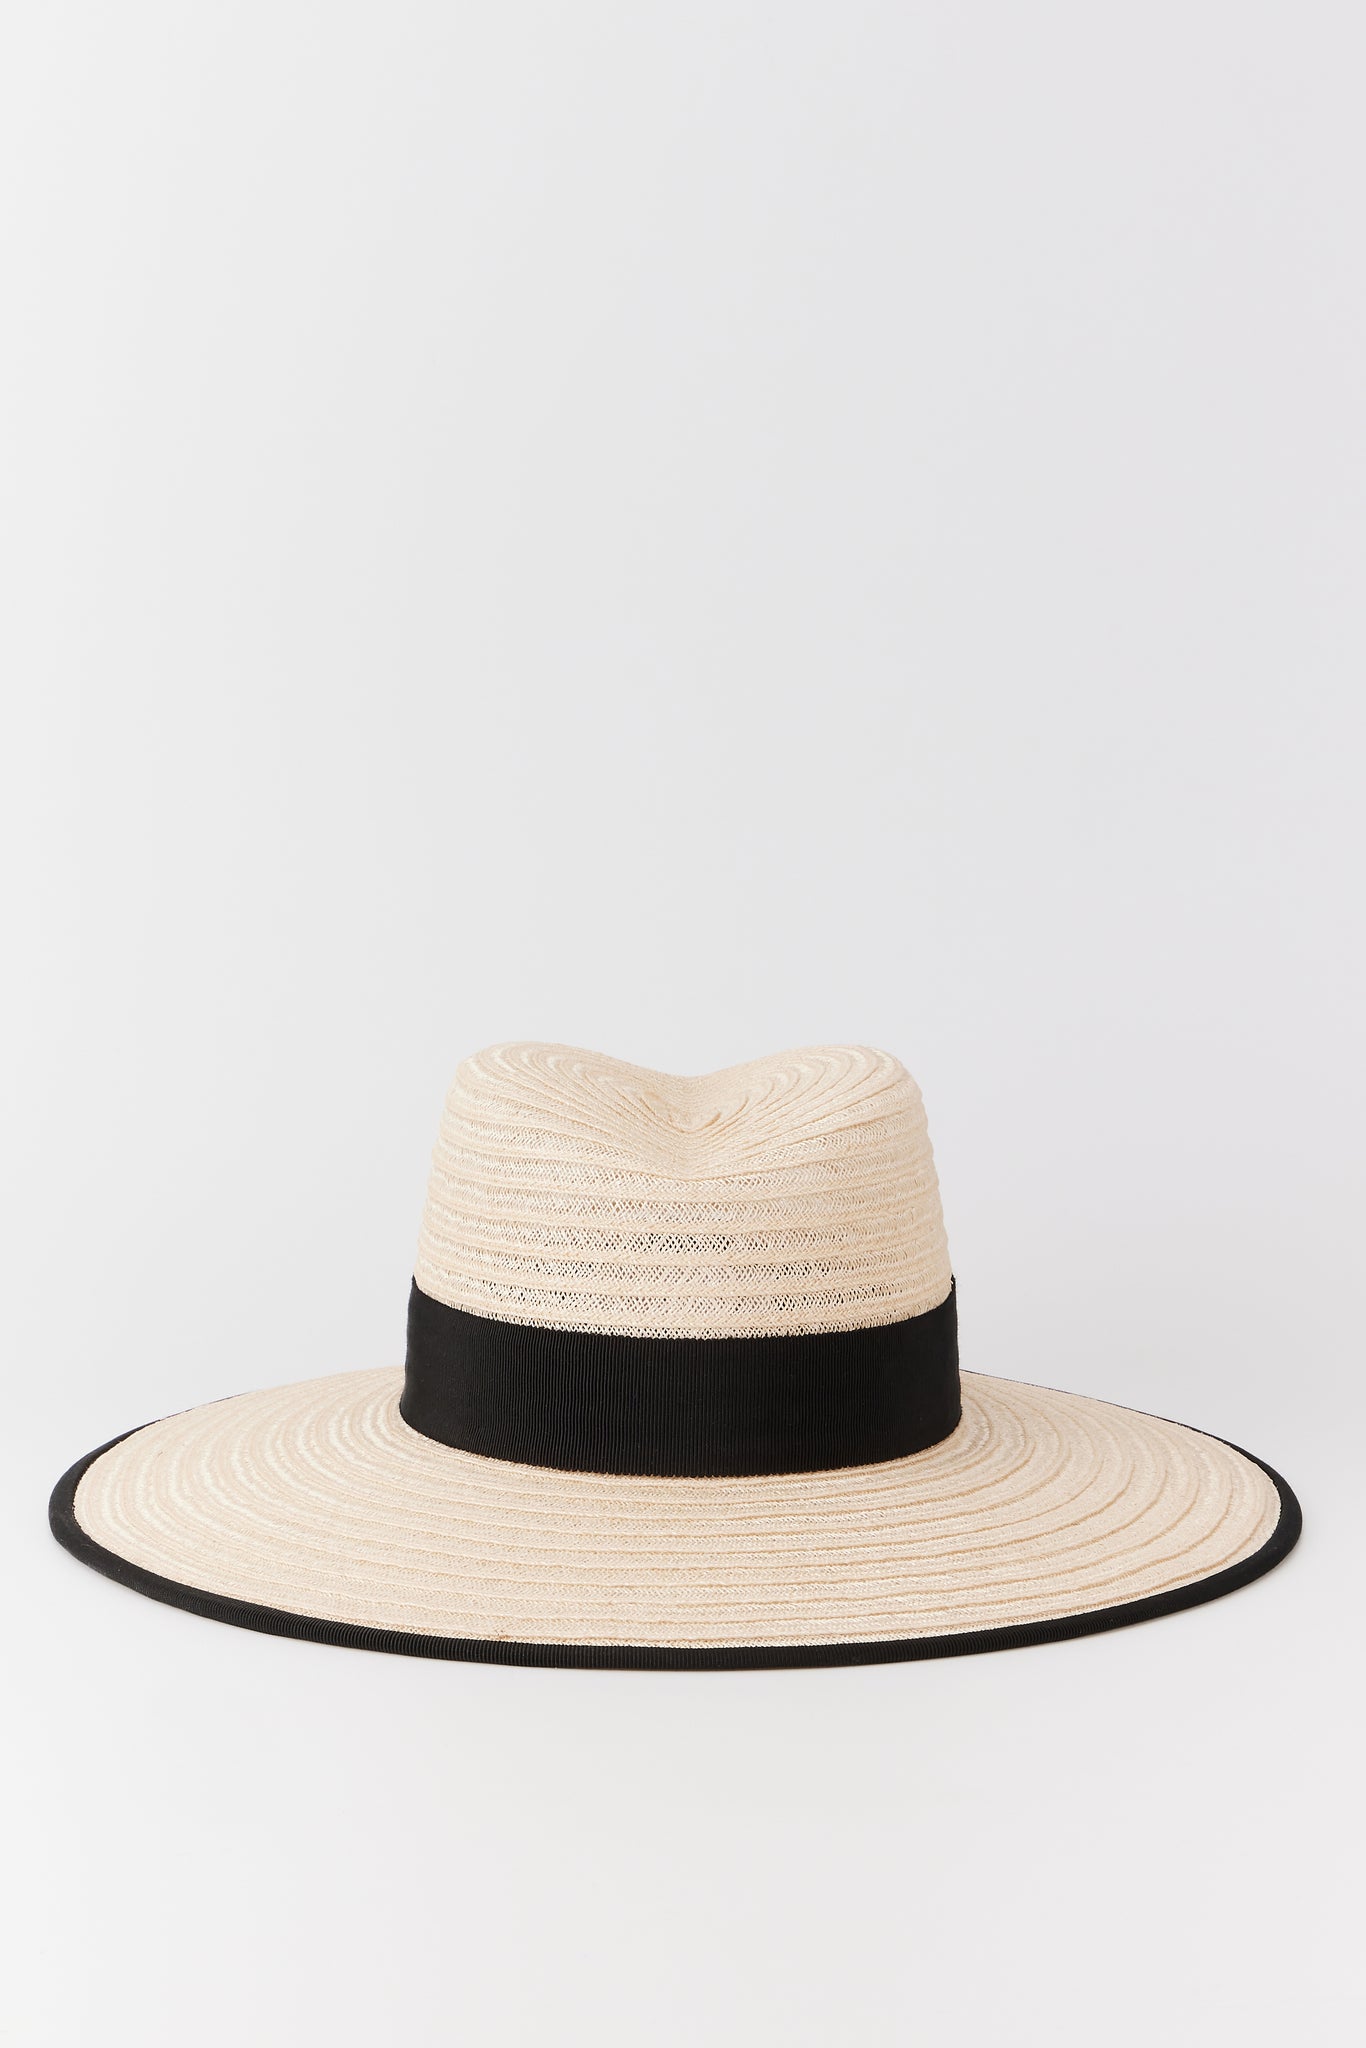 Natural Straw Hat with Black Band